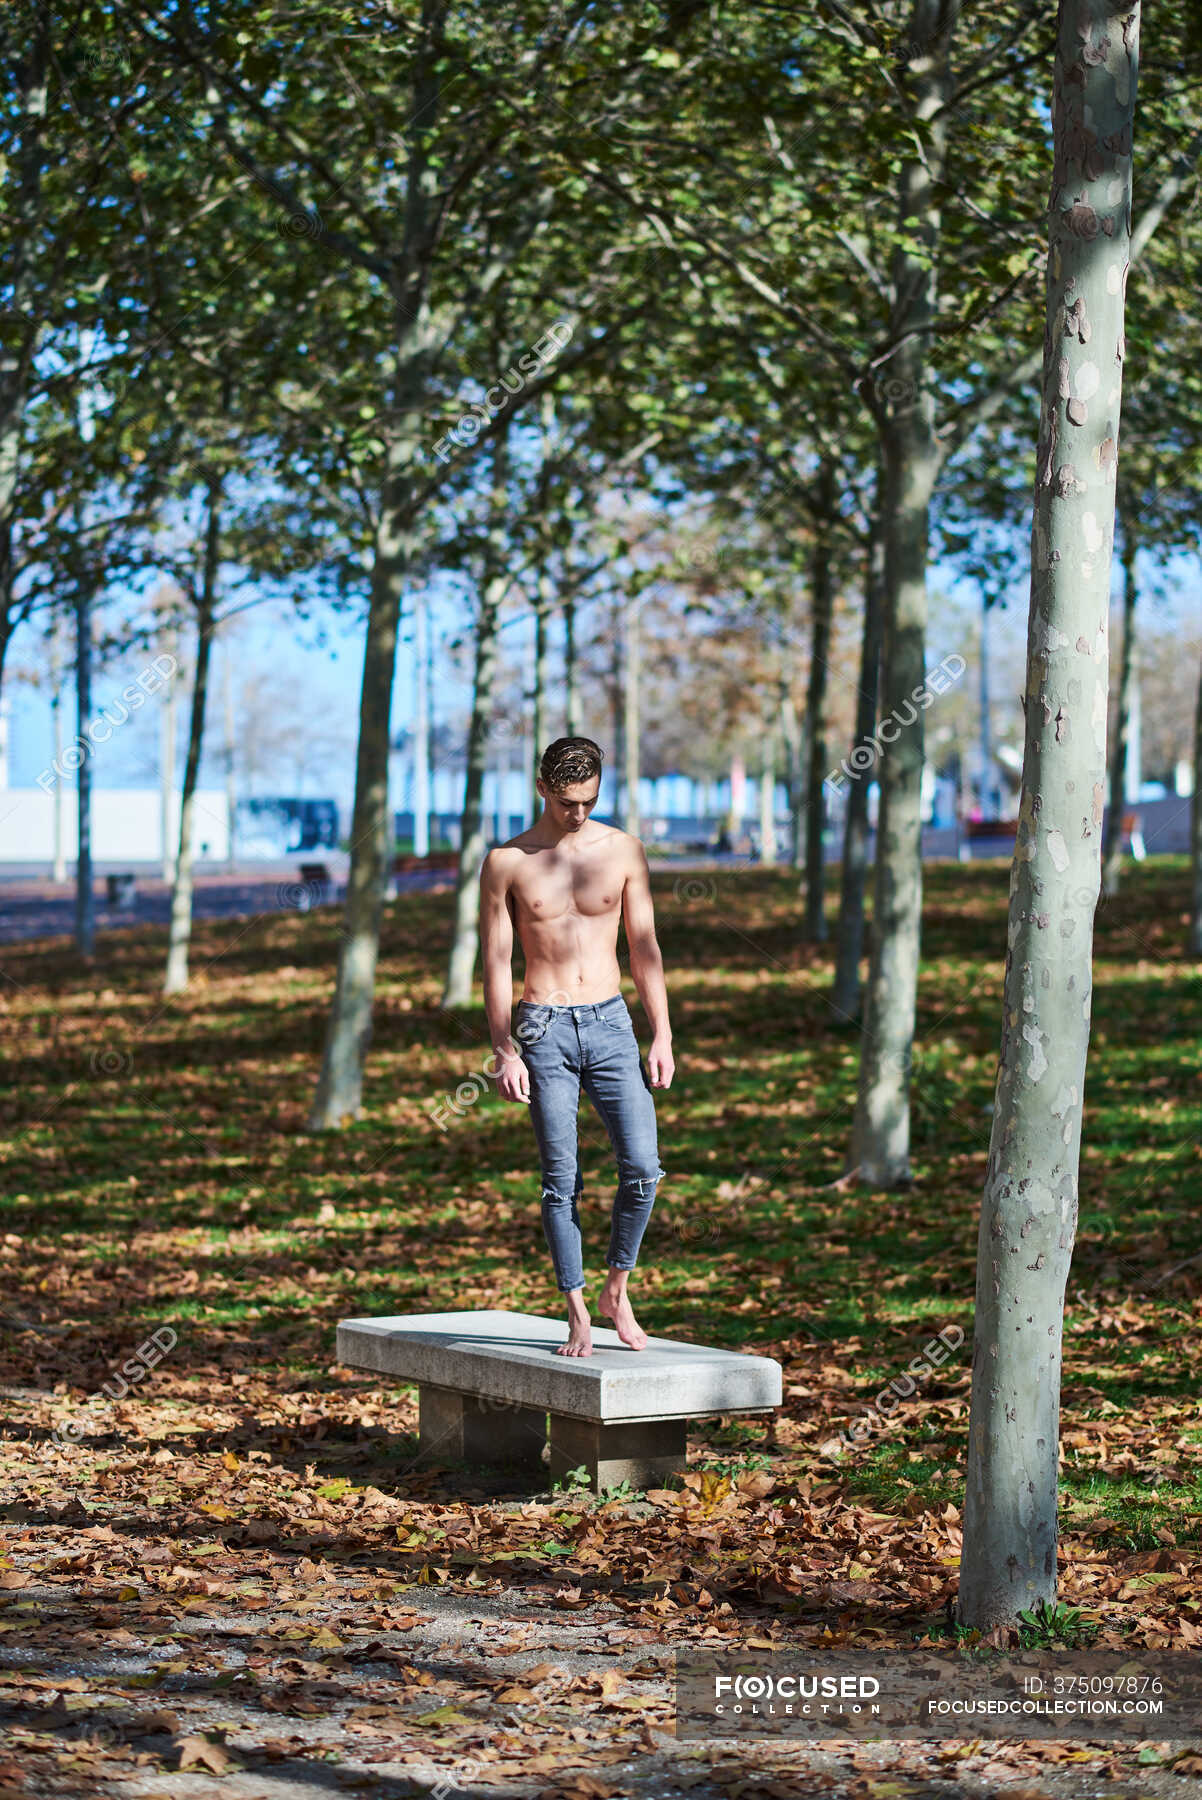 Full Body Shirtless Male Athlete In Ripped Jeans Standing On Concrete Bench And Looking Down